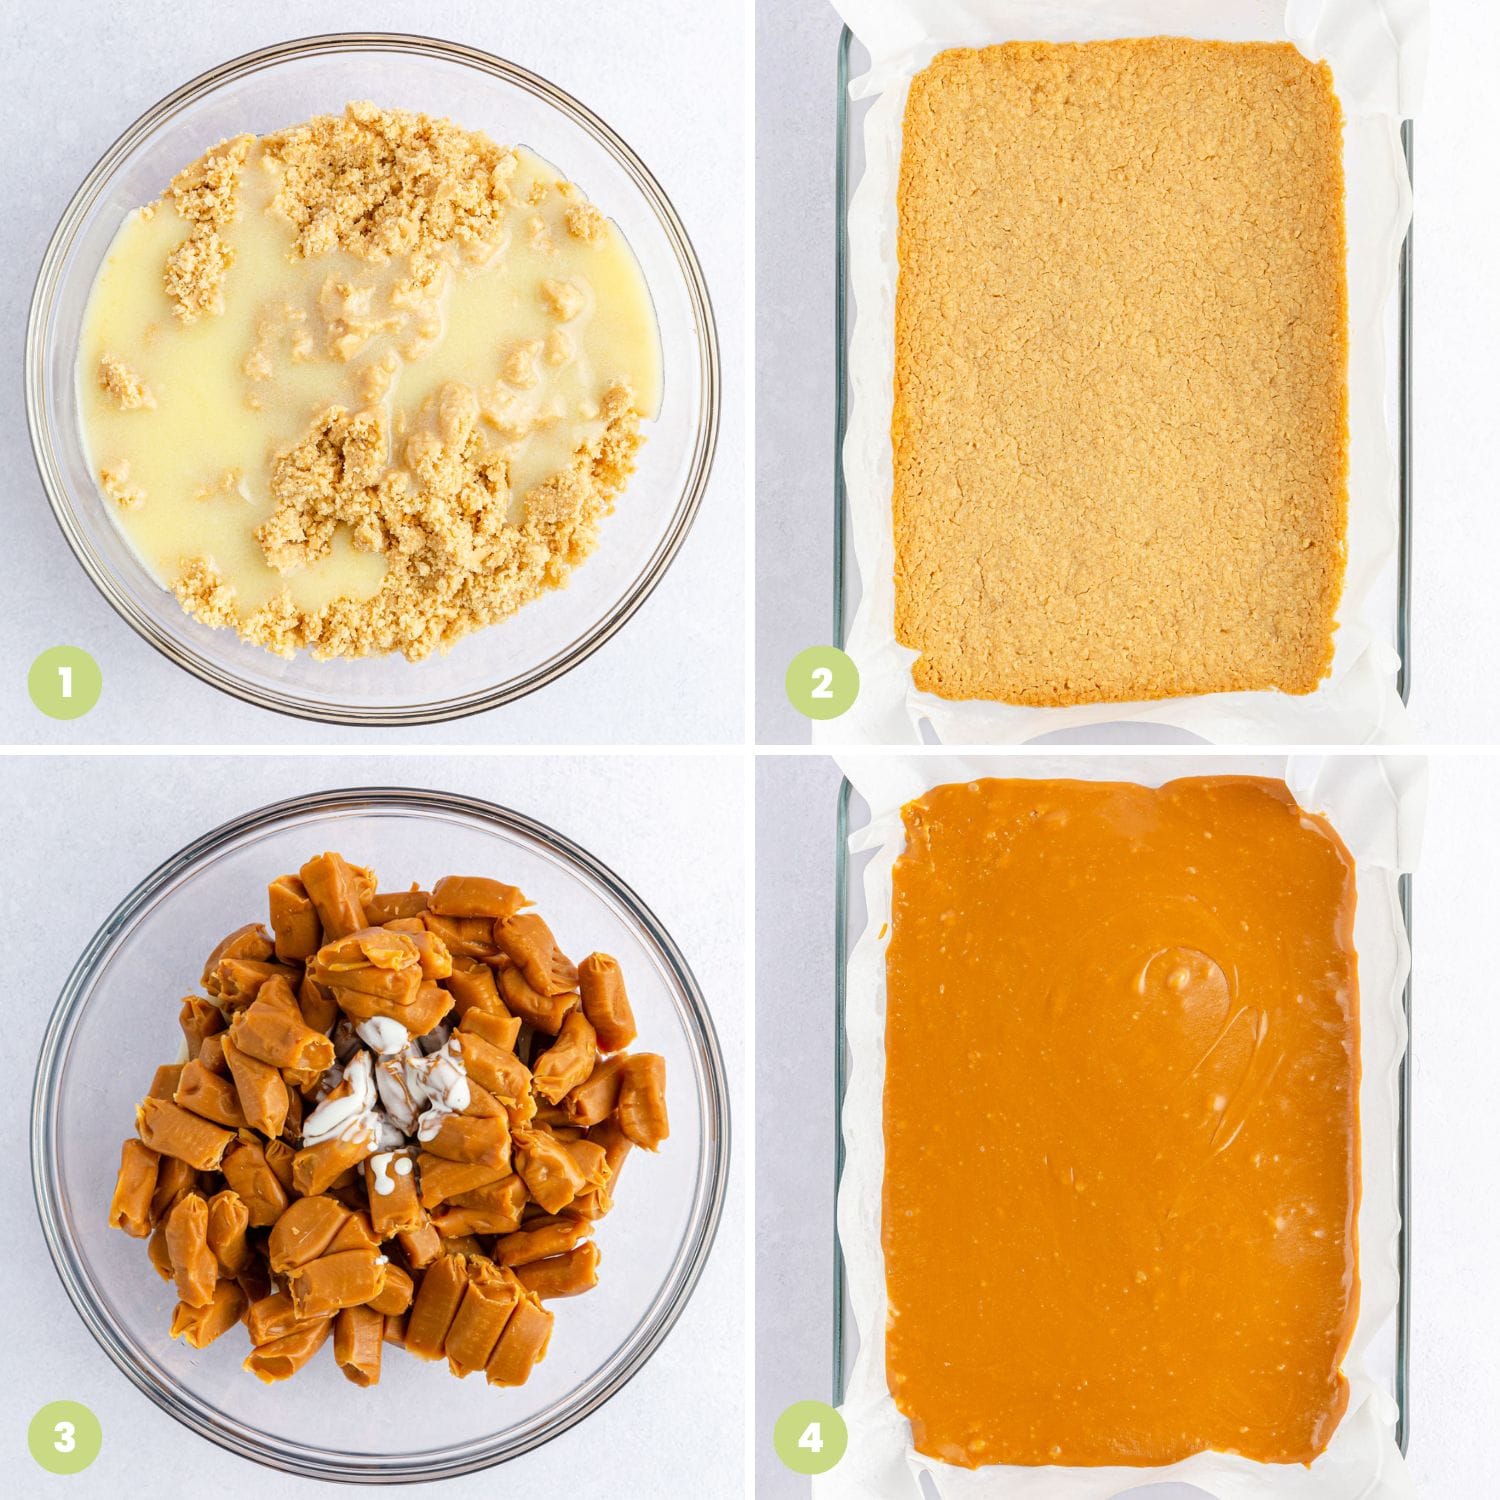 Collage of four images showing how to make homemade Twix bars